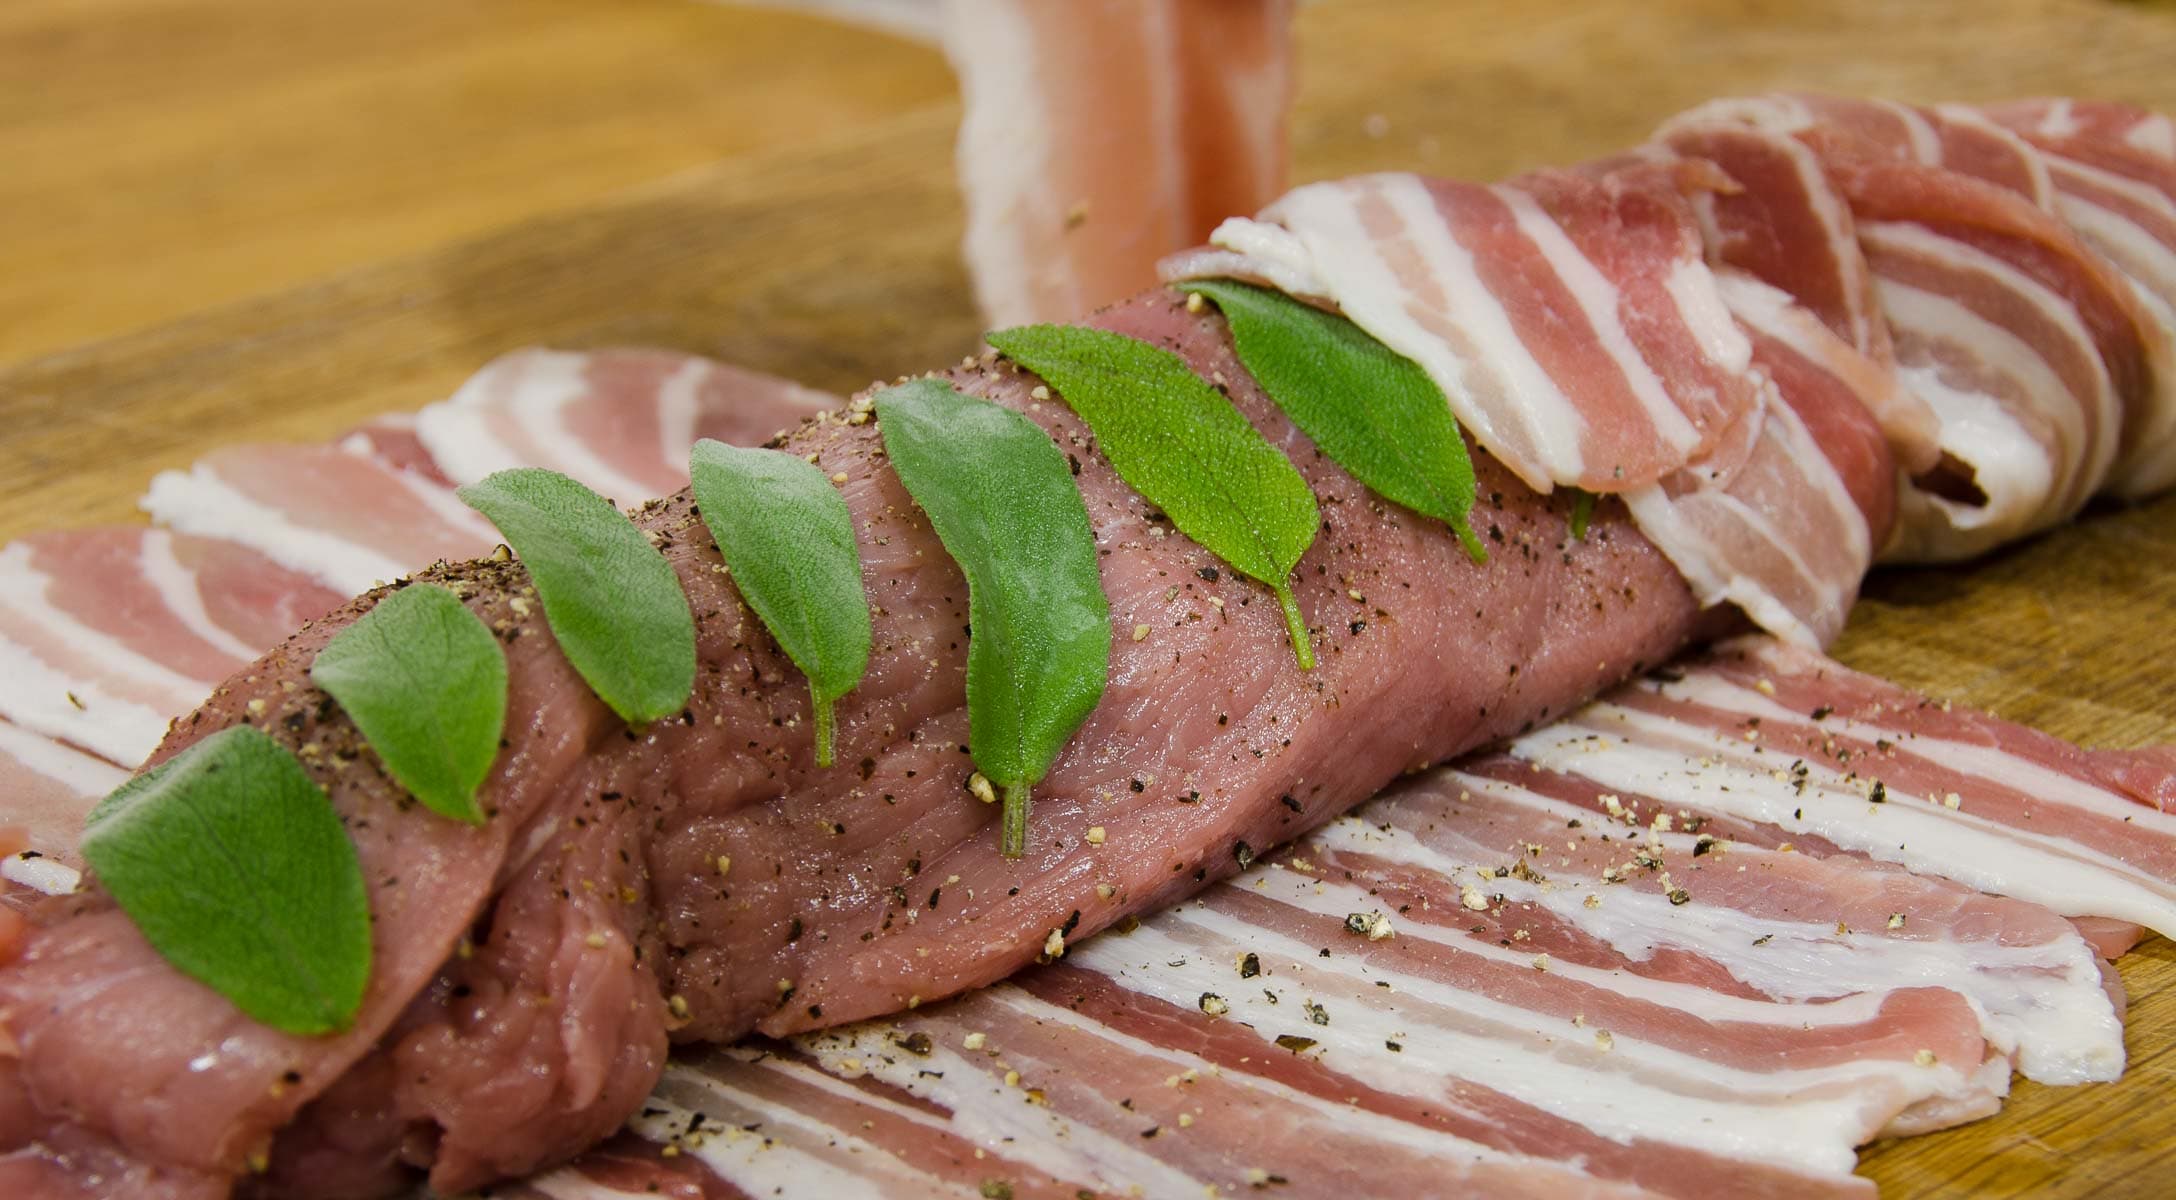 Bacon strips being wrapped around a pork fillet with sage leaves.